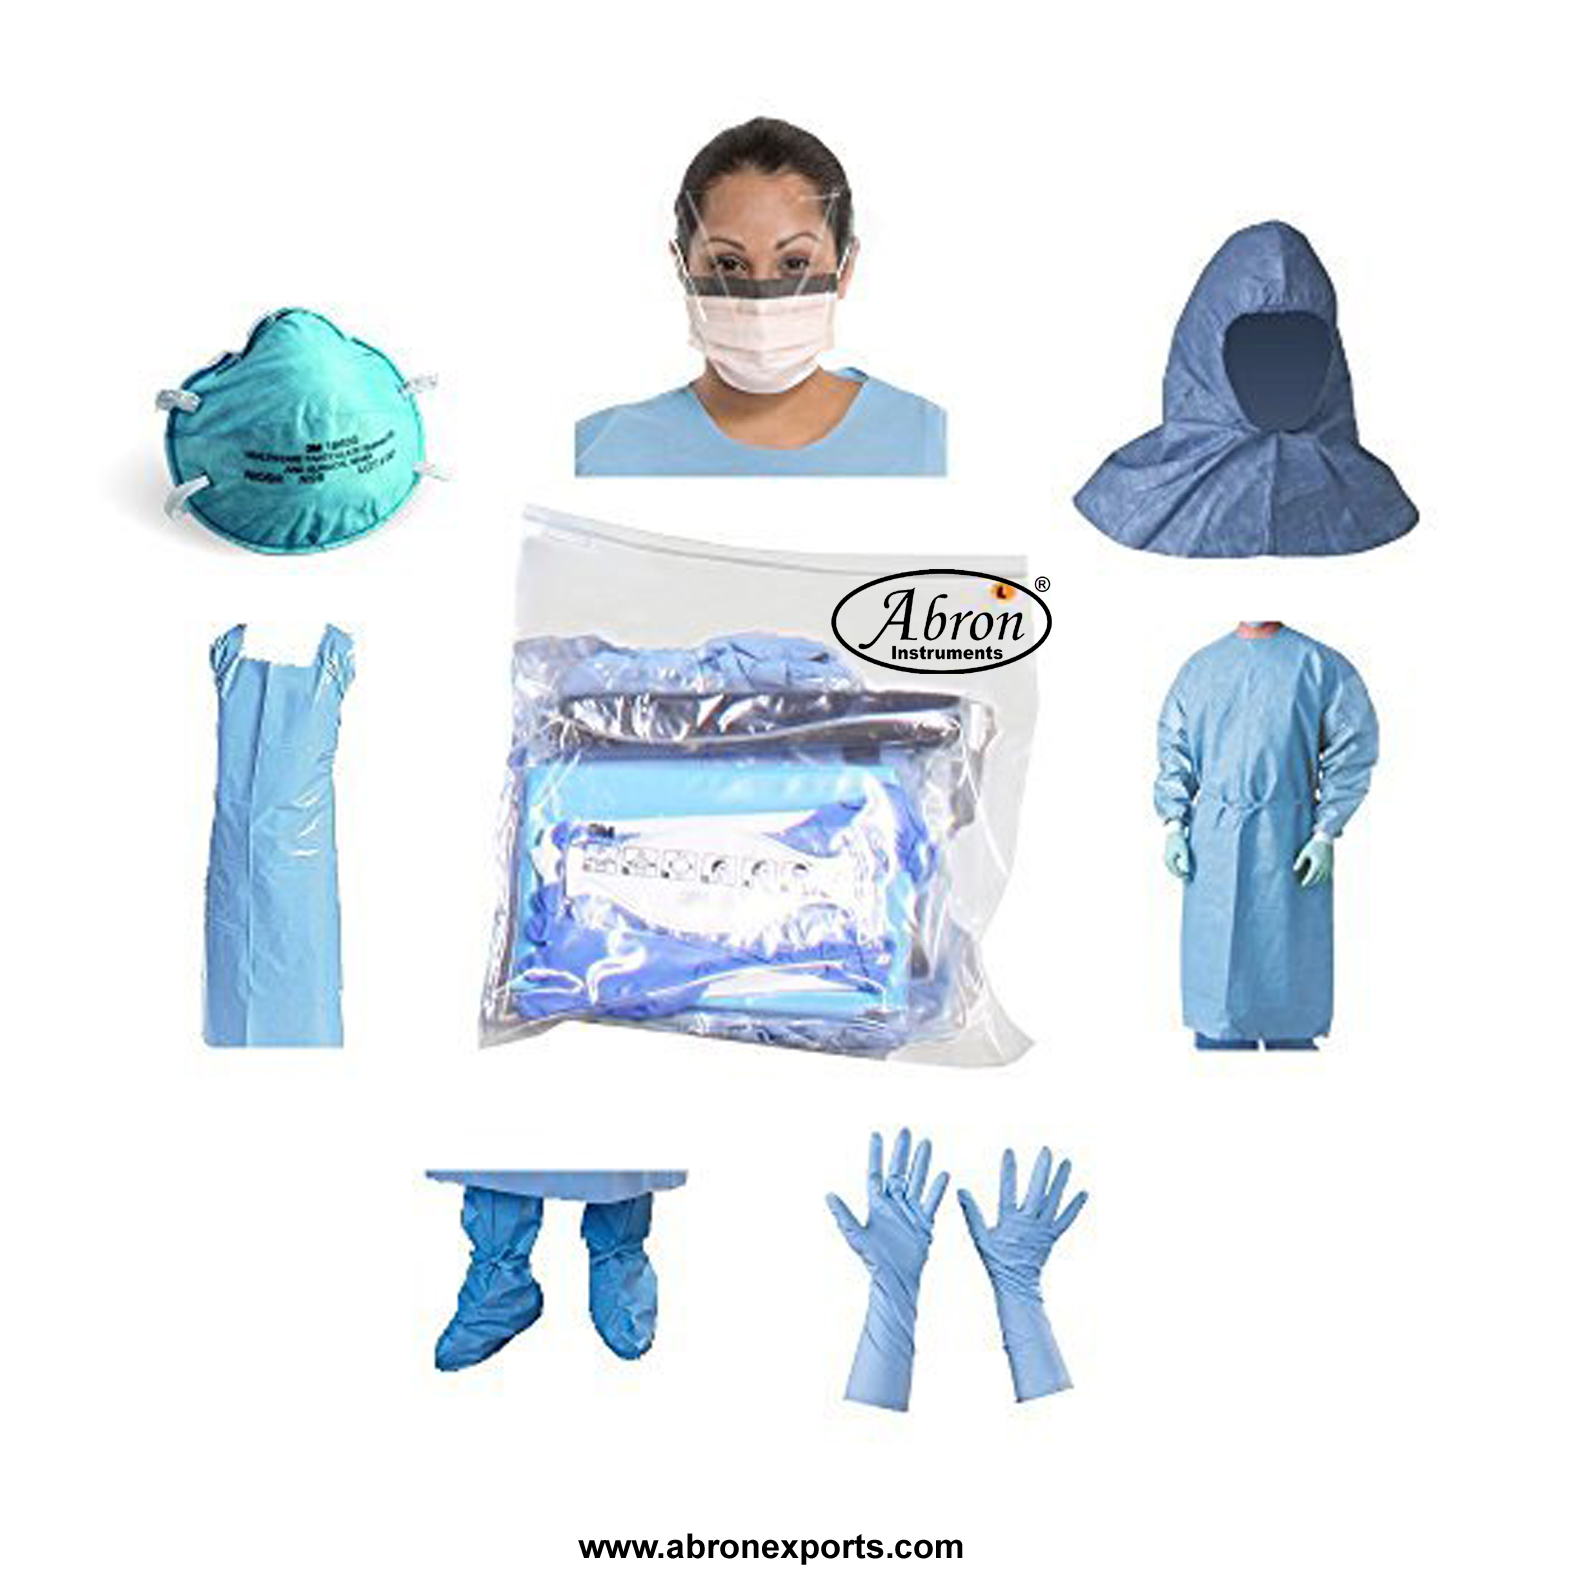 abron medical safety ppe kit1 for personal protection hospital set disposable